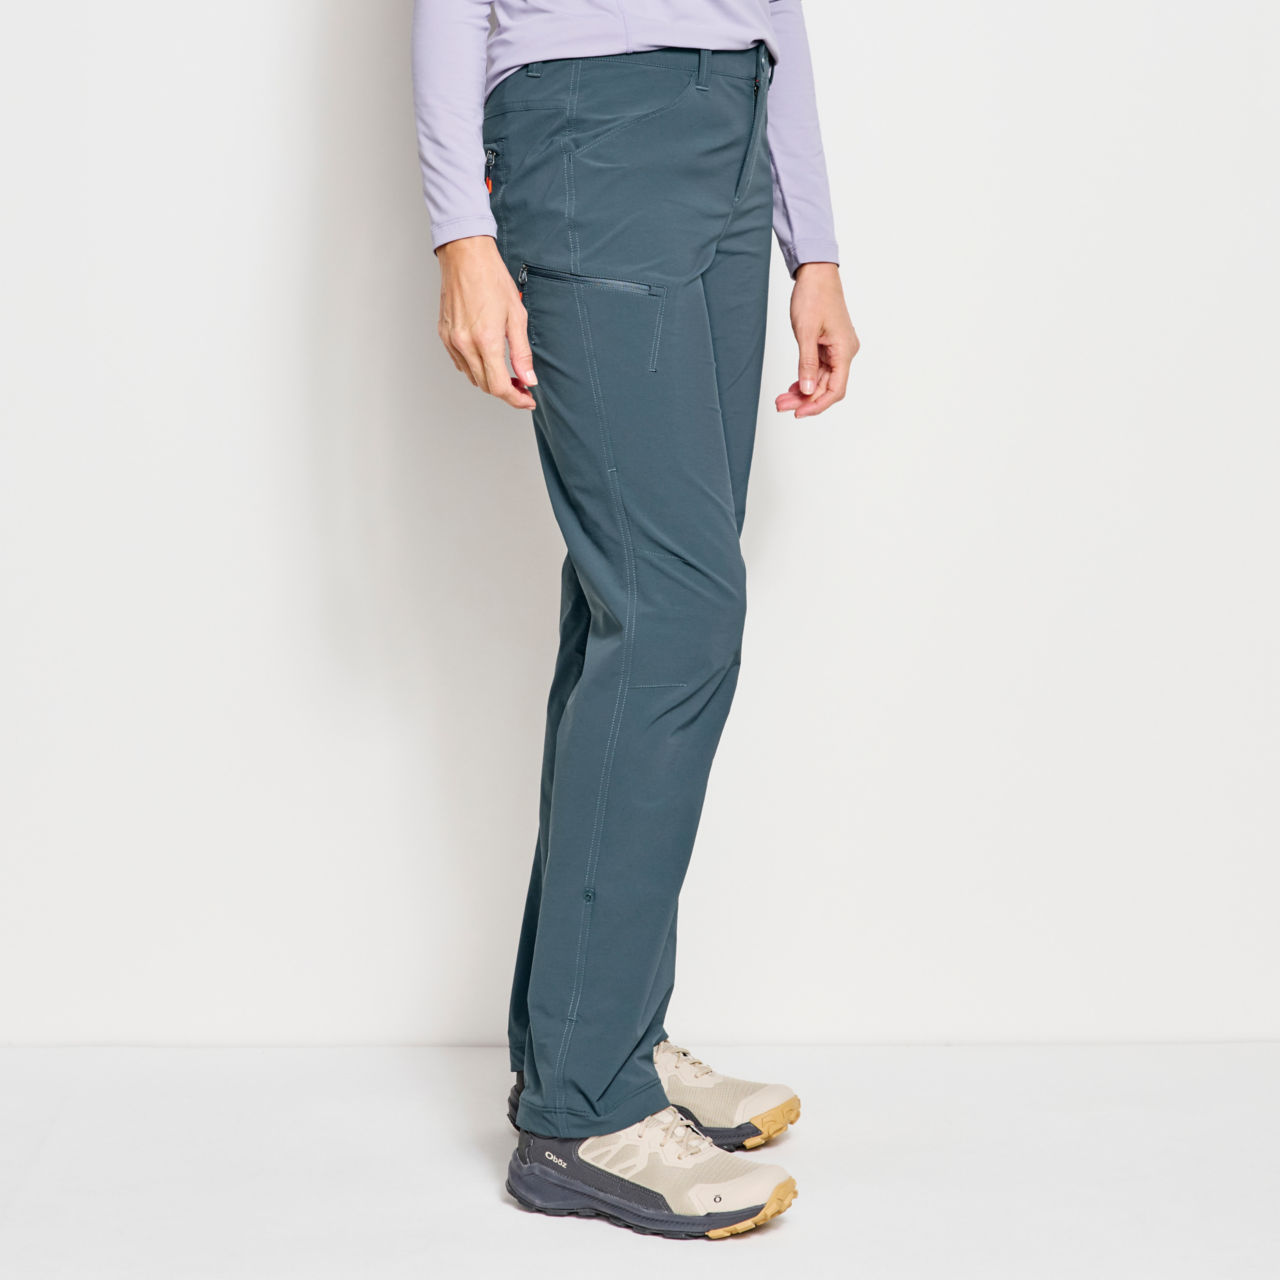 Jackson Quick-Dry Convertible Pants - STORM image number 1